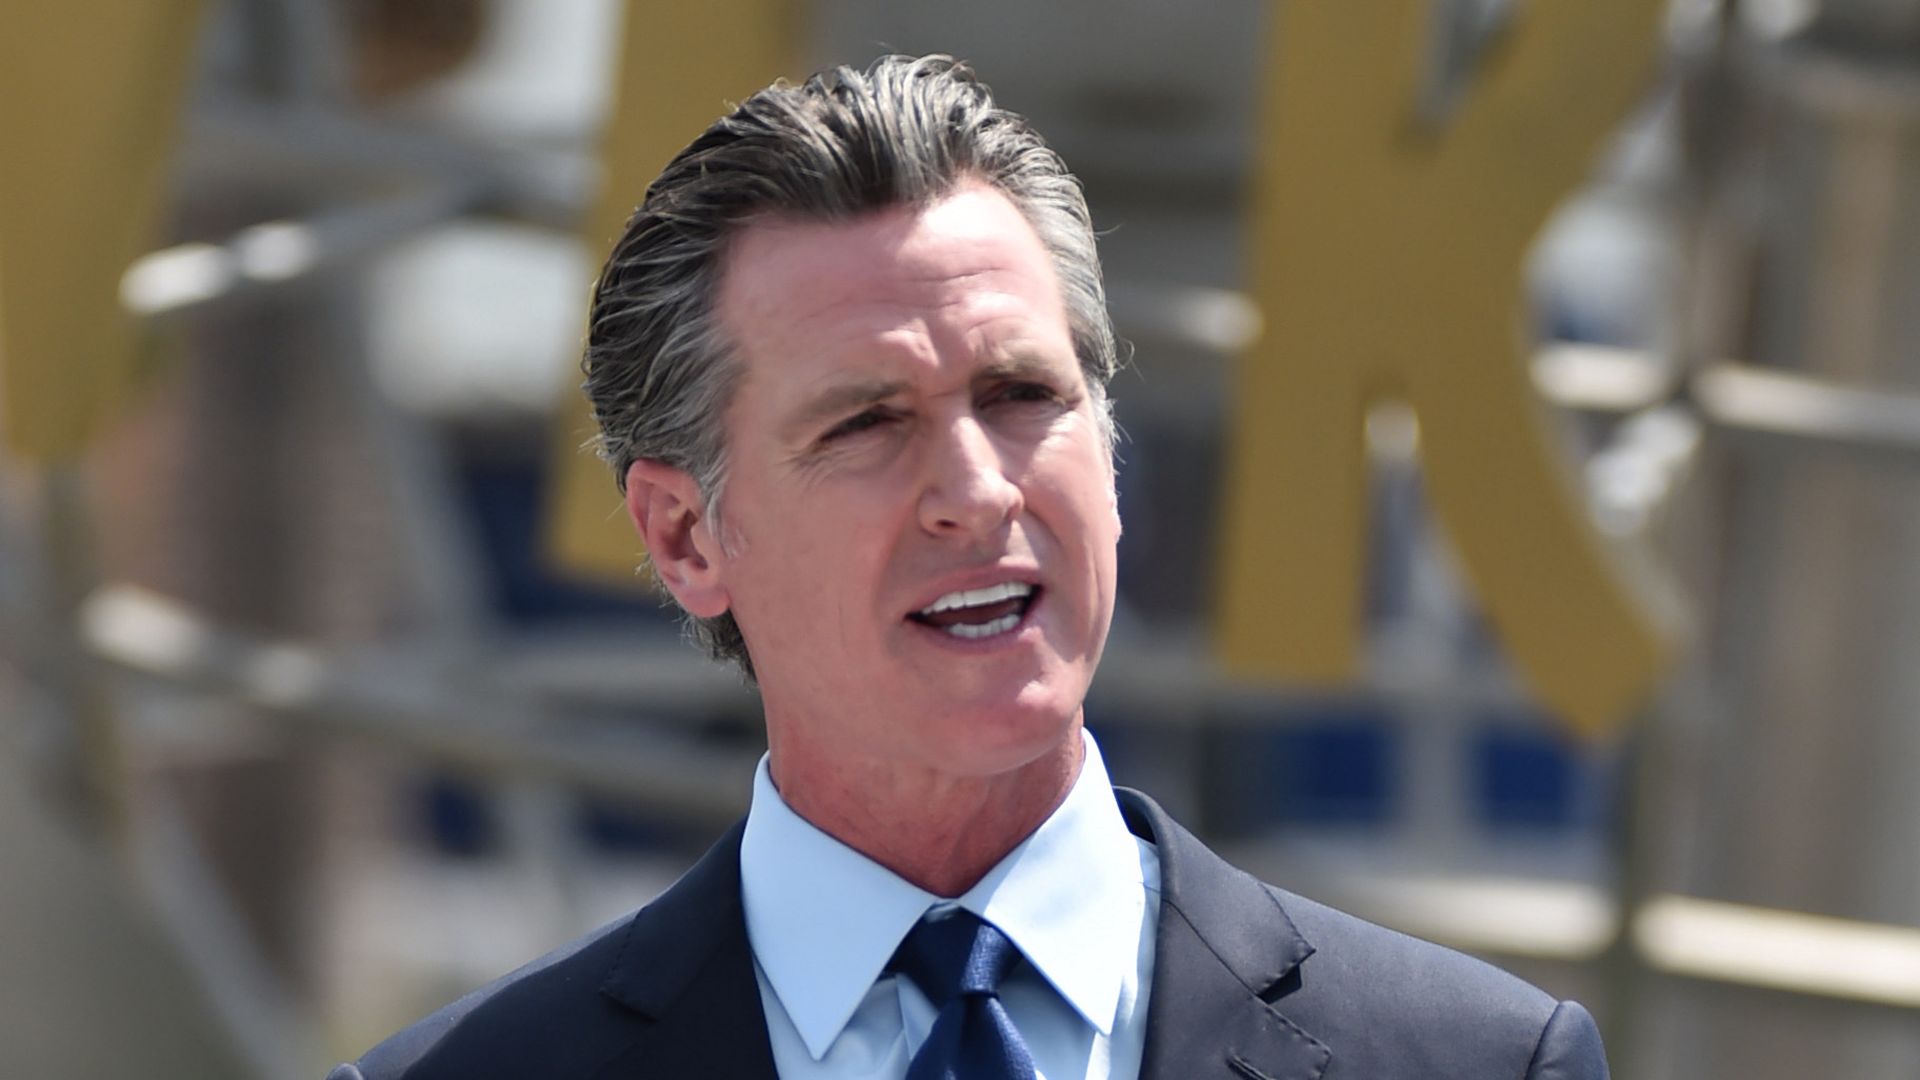  California Governor Gavin Newsom at a press conference for the official reopening of the state of California at Universal Studios Hollywood on June 15